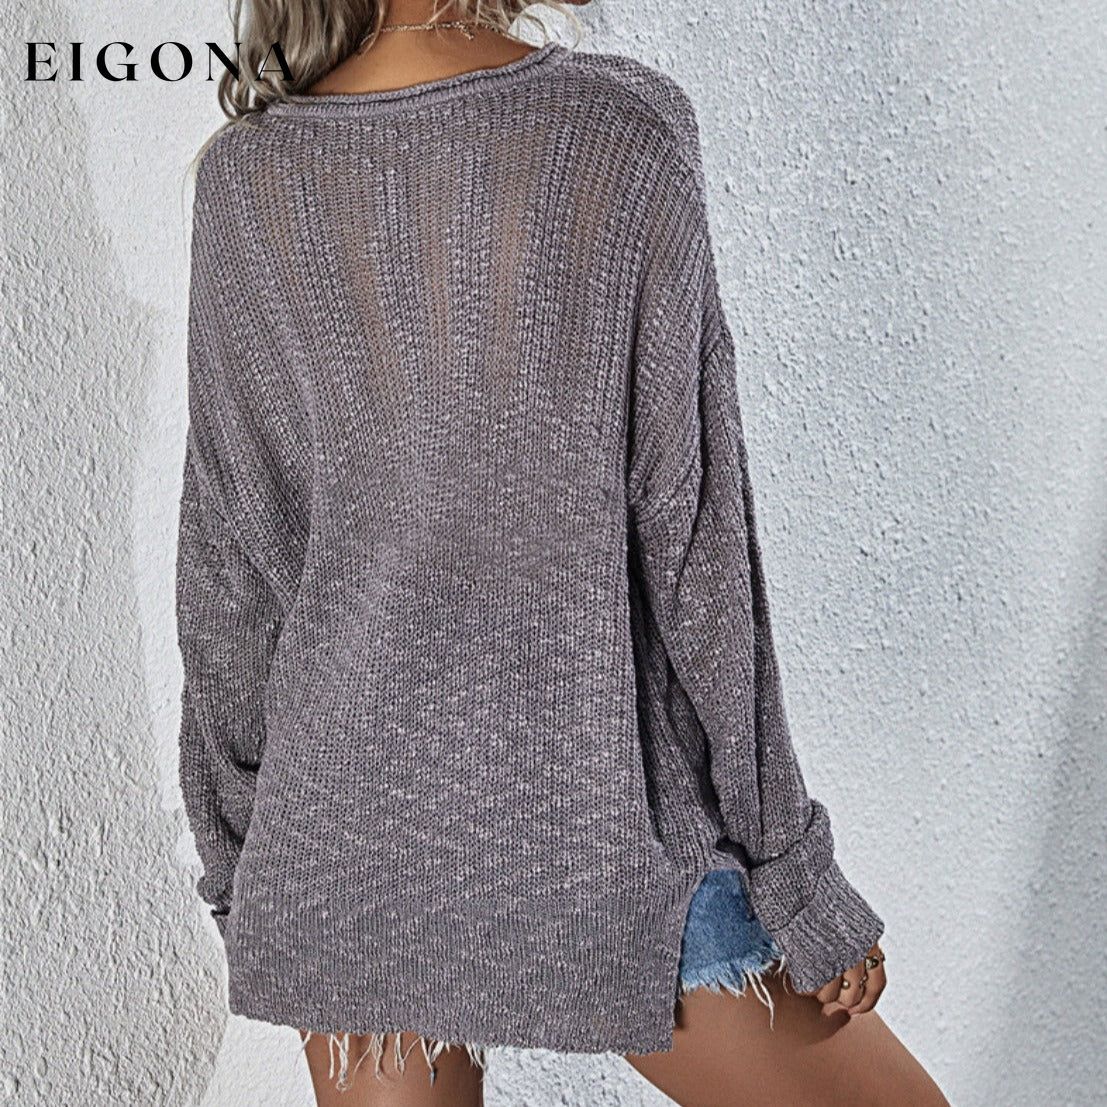 Notched Neck Slit Knit Top clothes J&Q long sleeve shirt long sleeve shirts long sleeve top long sleeve tops Ship From Overseas Shipping Delay 09/29/2023 - 10/04/2023 shirt shirts top tops